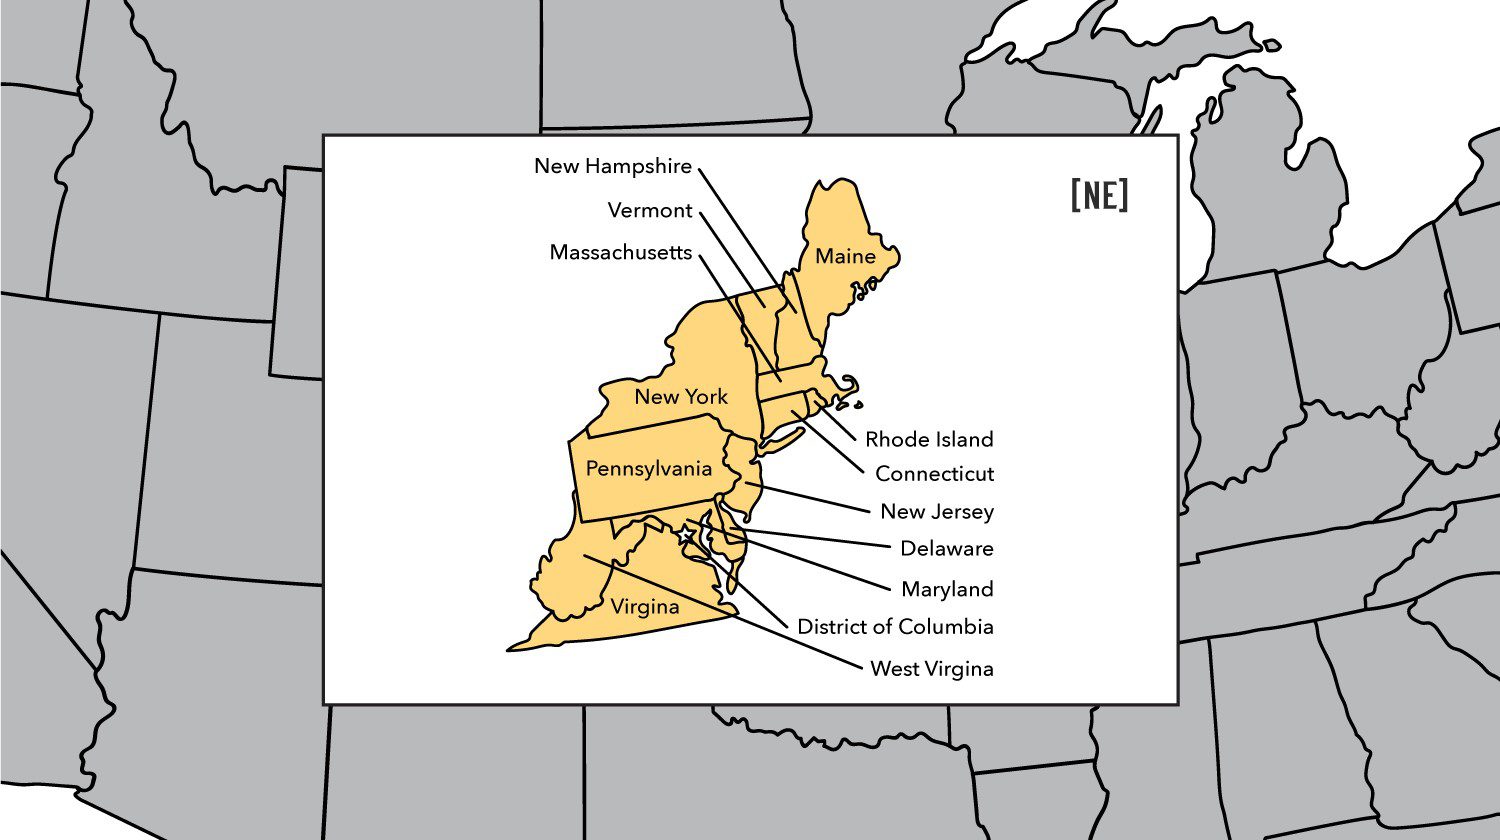 Northeast Region Outreach map displaying the states of Connecticut, Delaware, Maine, Maryland, Massachusetts, New Hampshire, New Jersey, New York, Pennsylvania, Rhode Island, Vermont, Virginia, Washington D.C., and West Virginia.